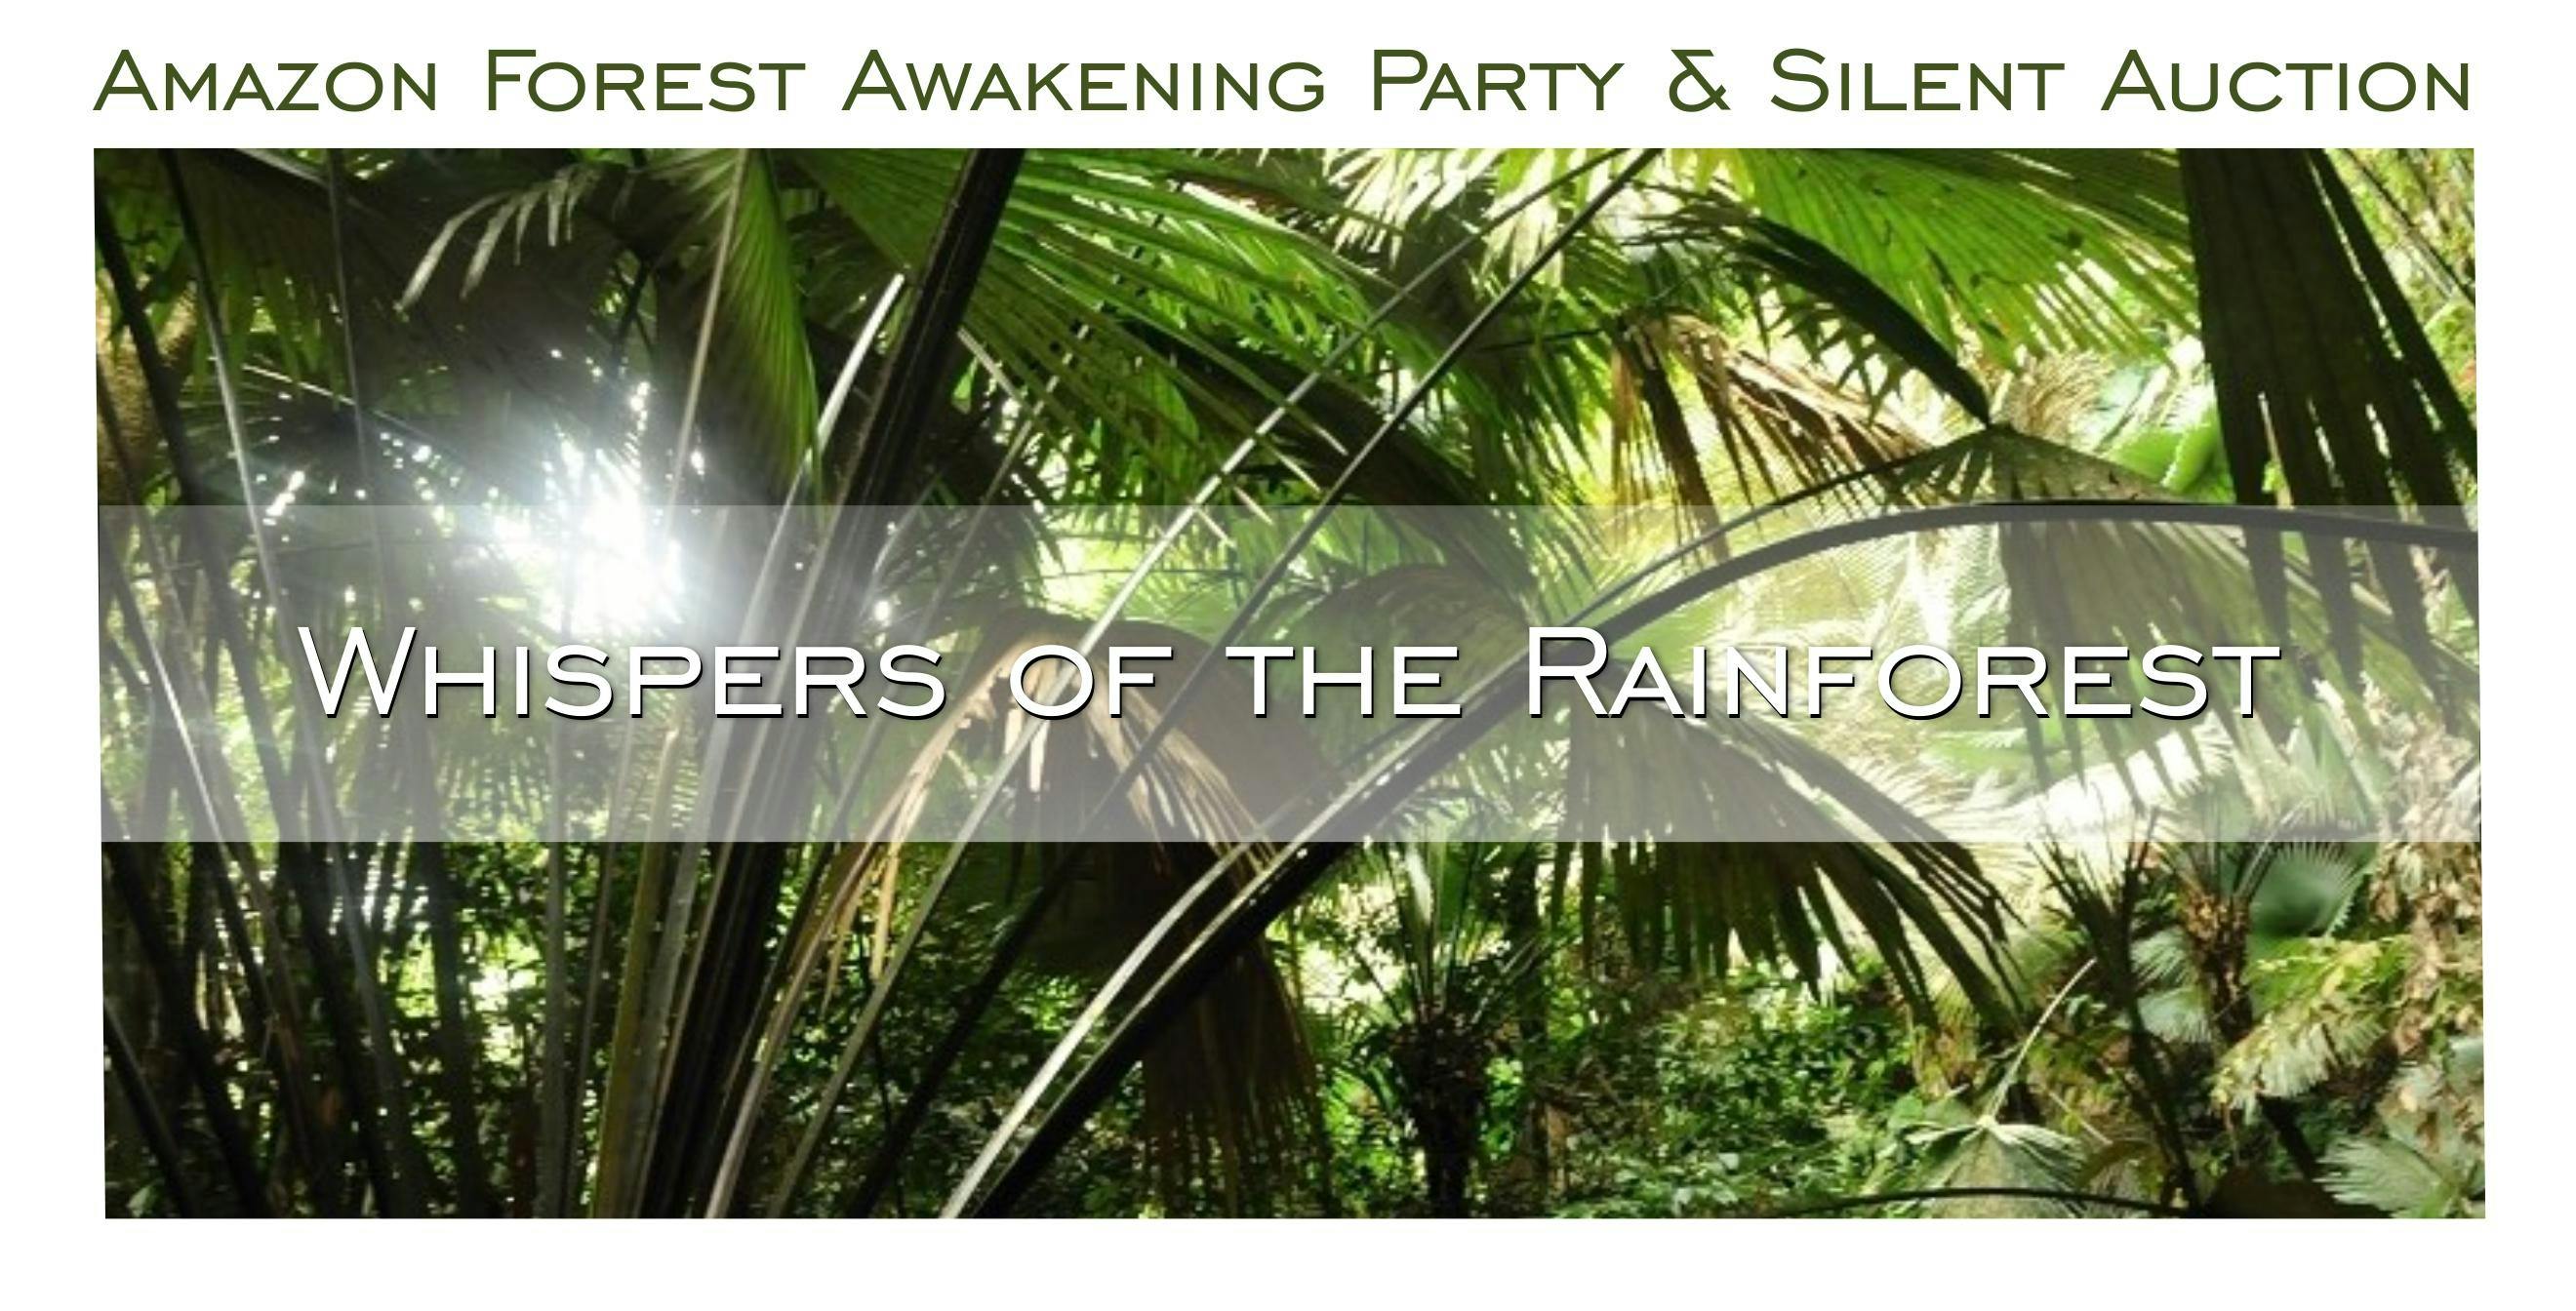 Whispers of the Rainforest – Amazon Forest Awakening Party & Silent Auction